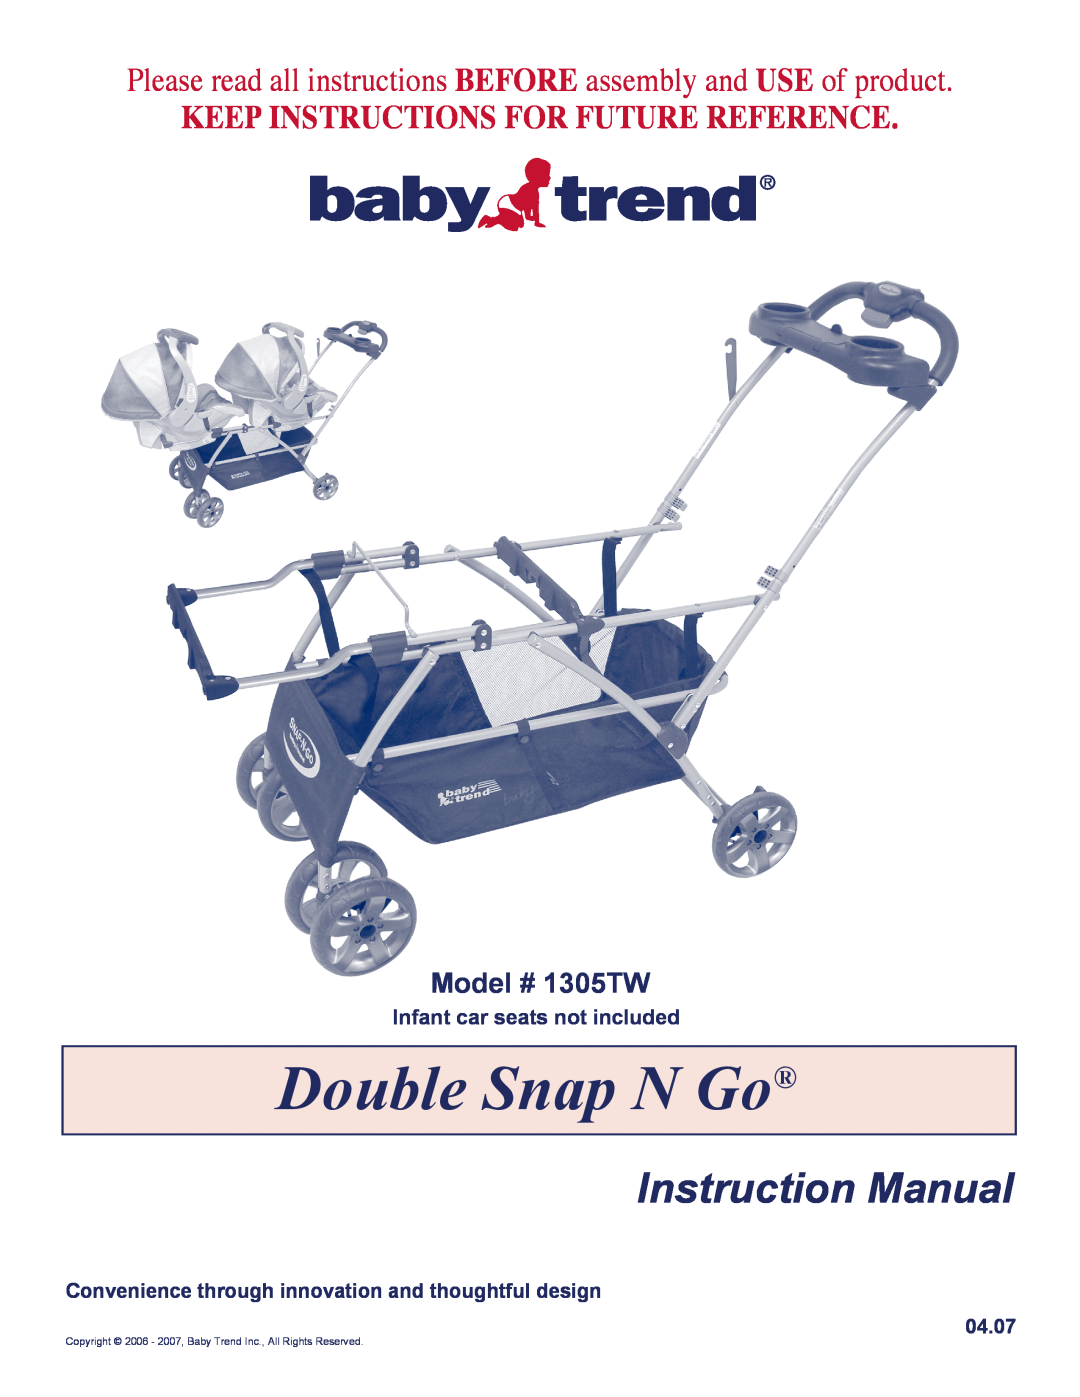 Baby Trend manual Double Snap N Go, Instruction Manual, Keep Instructions For Future Reference, Model # 1305TW 